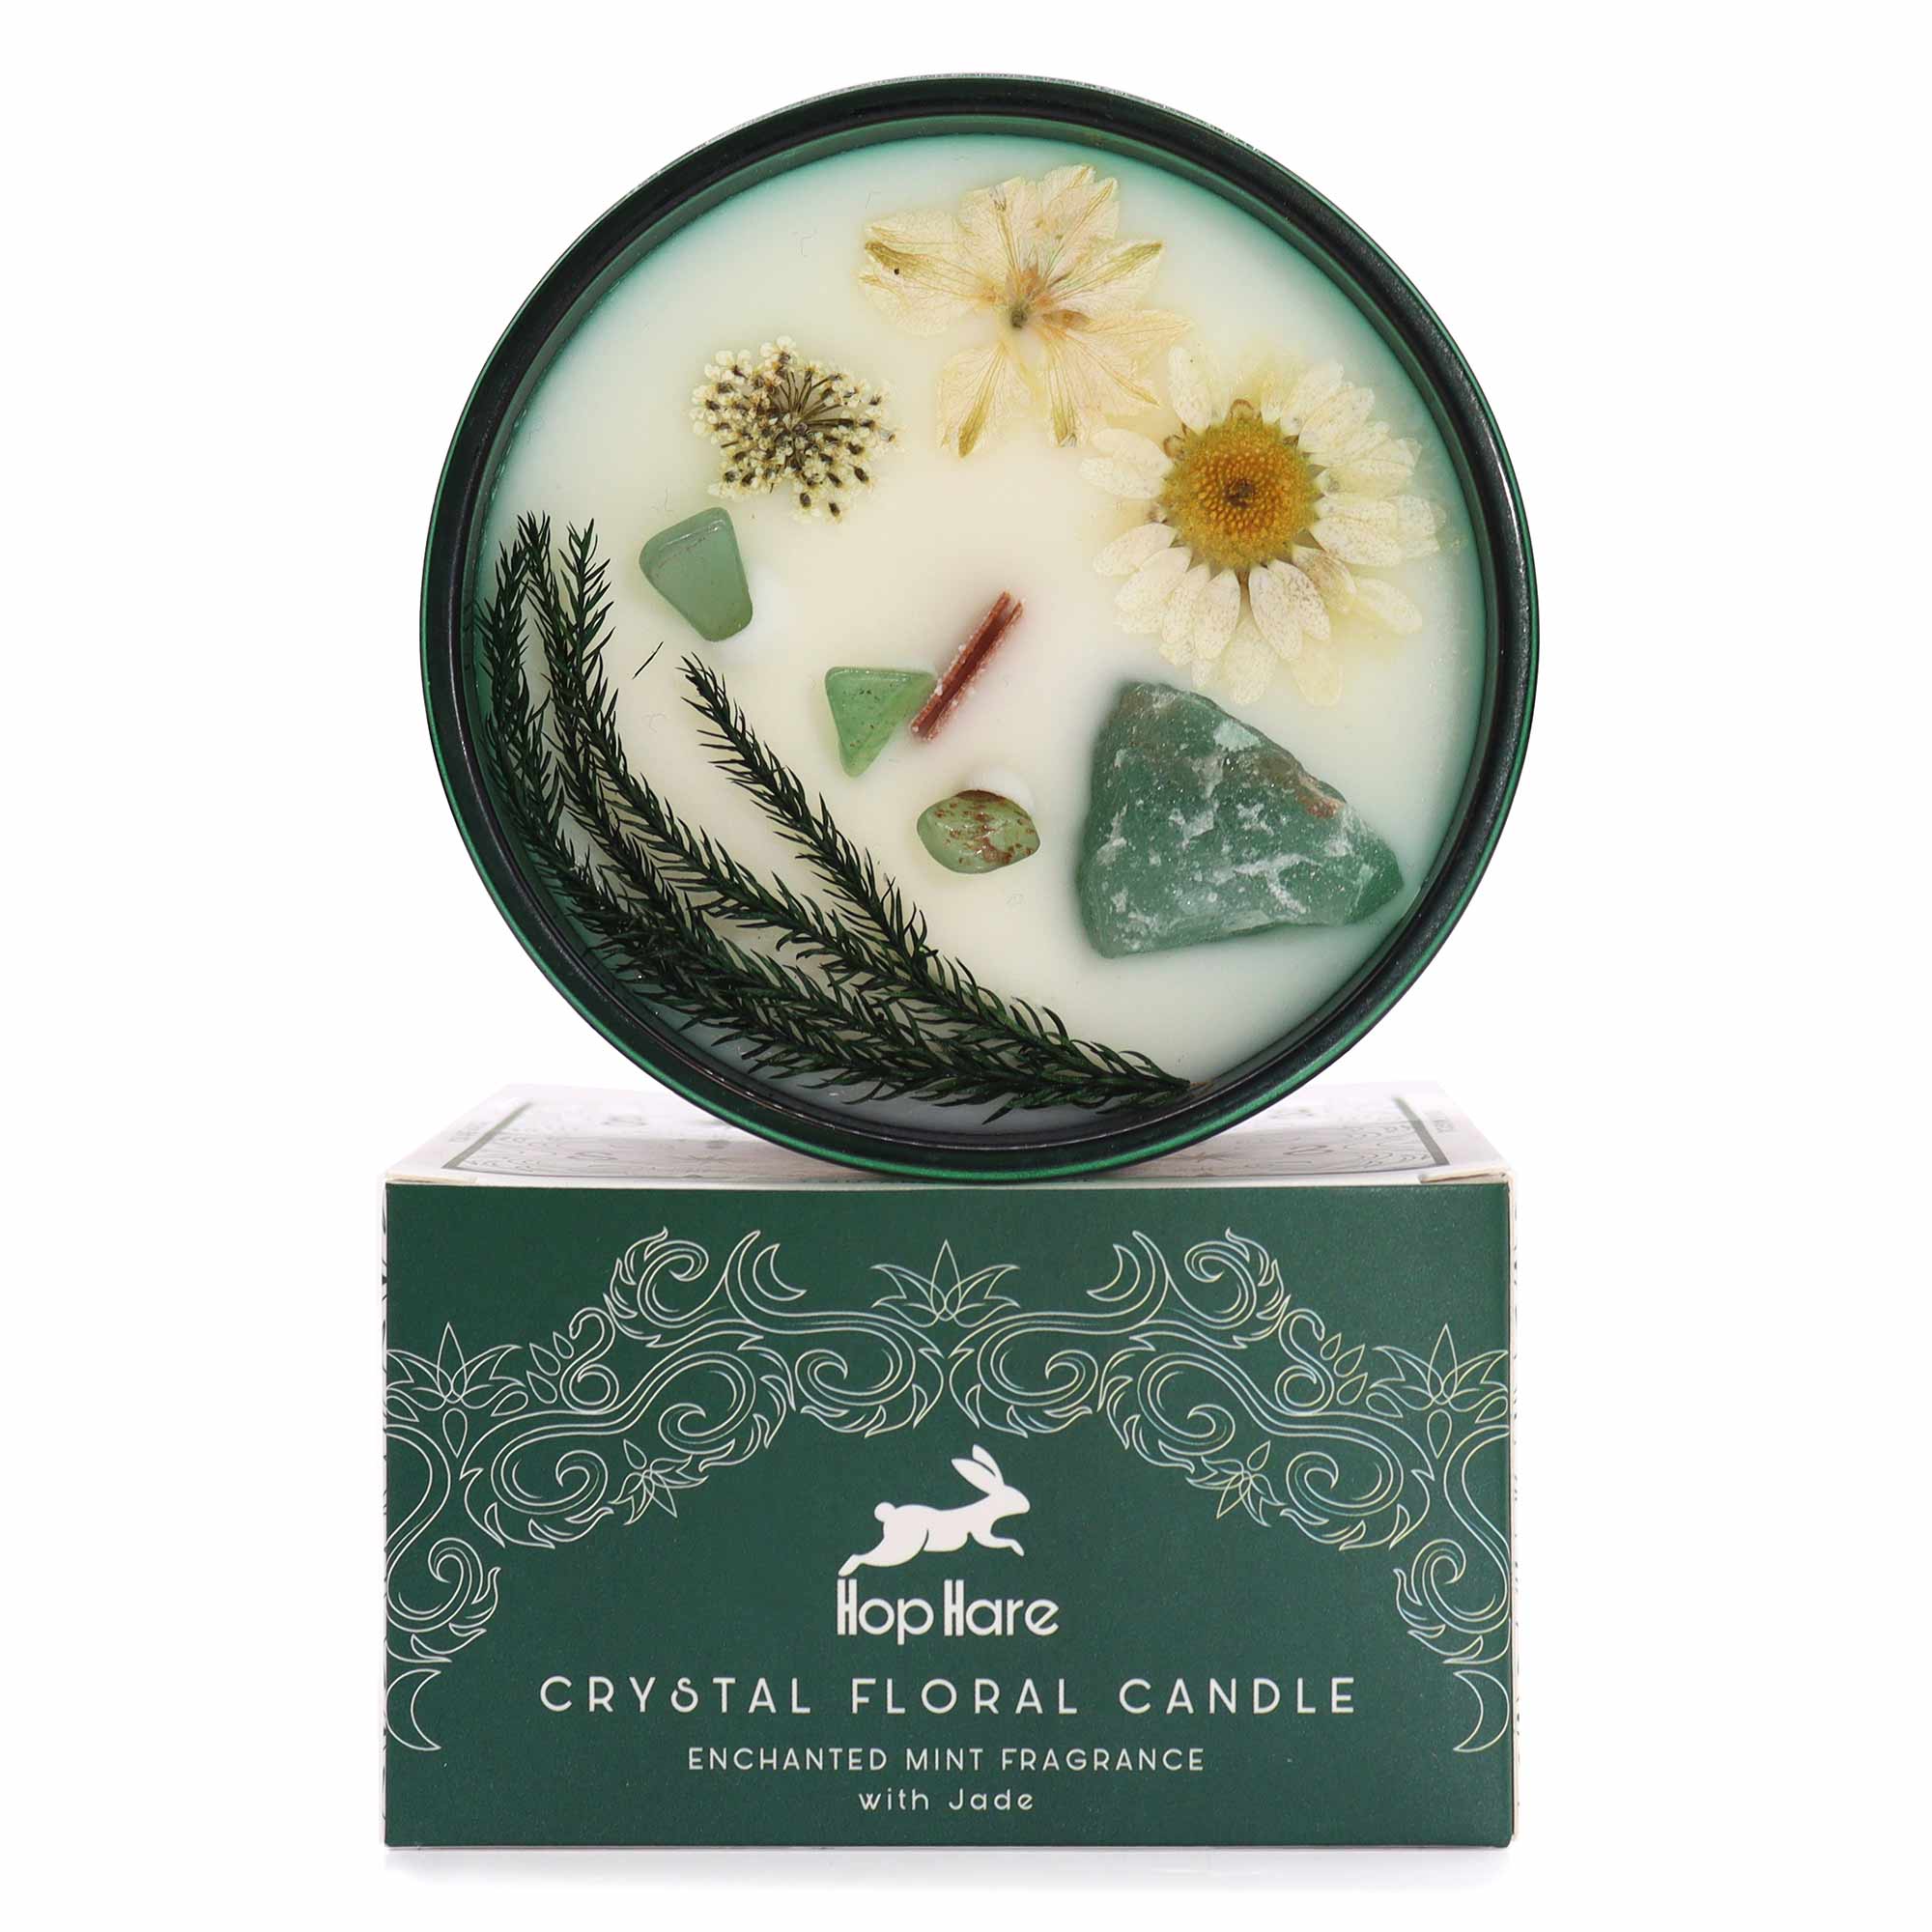 Hop Hare Crystal Magic Flower Candle – The Magician